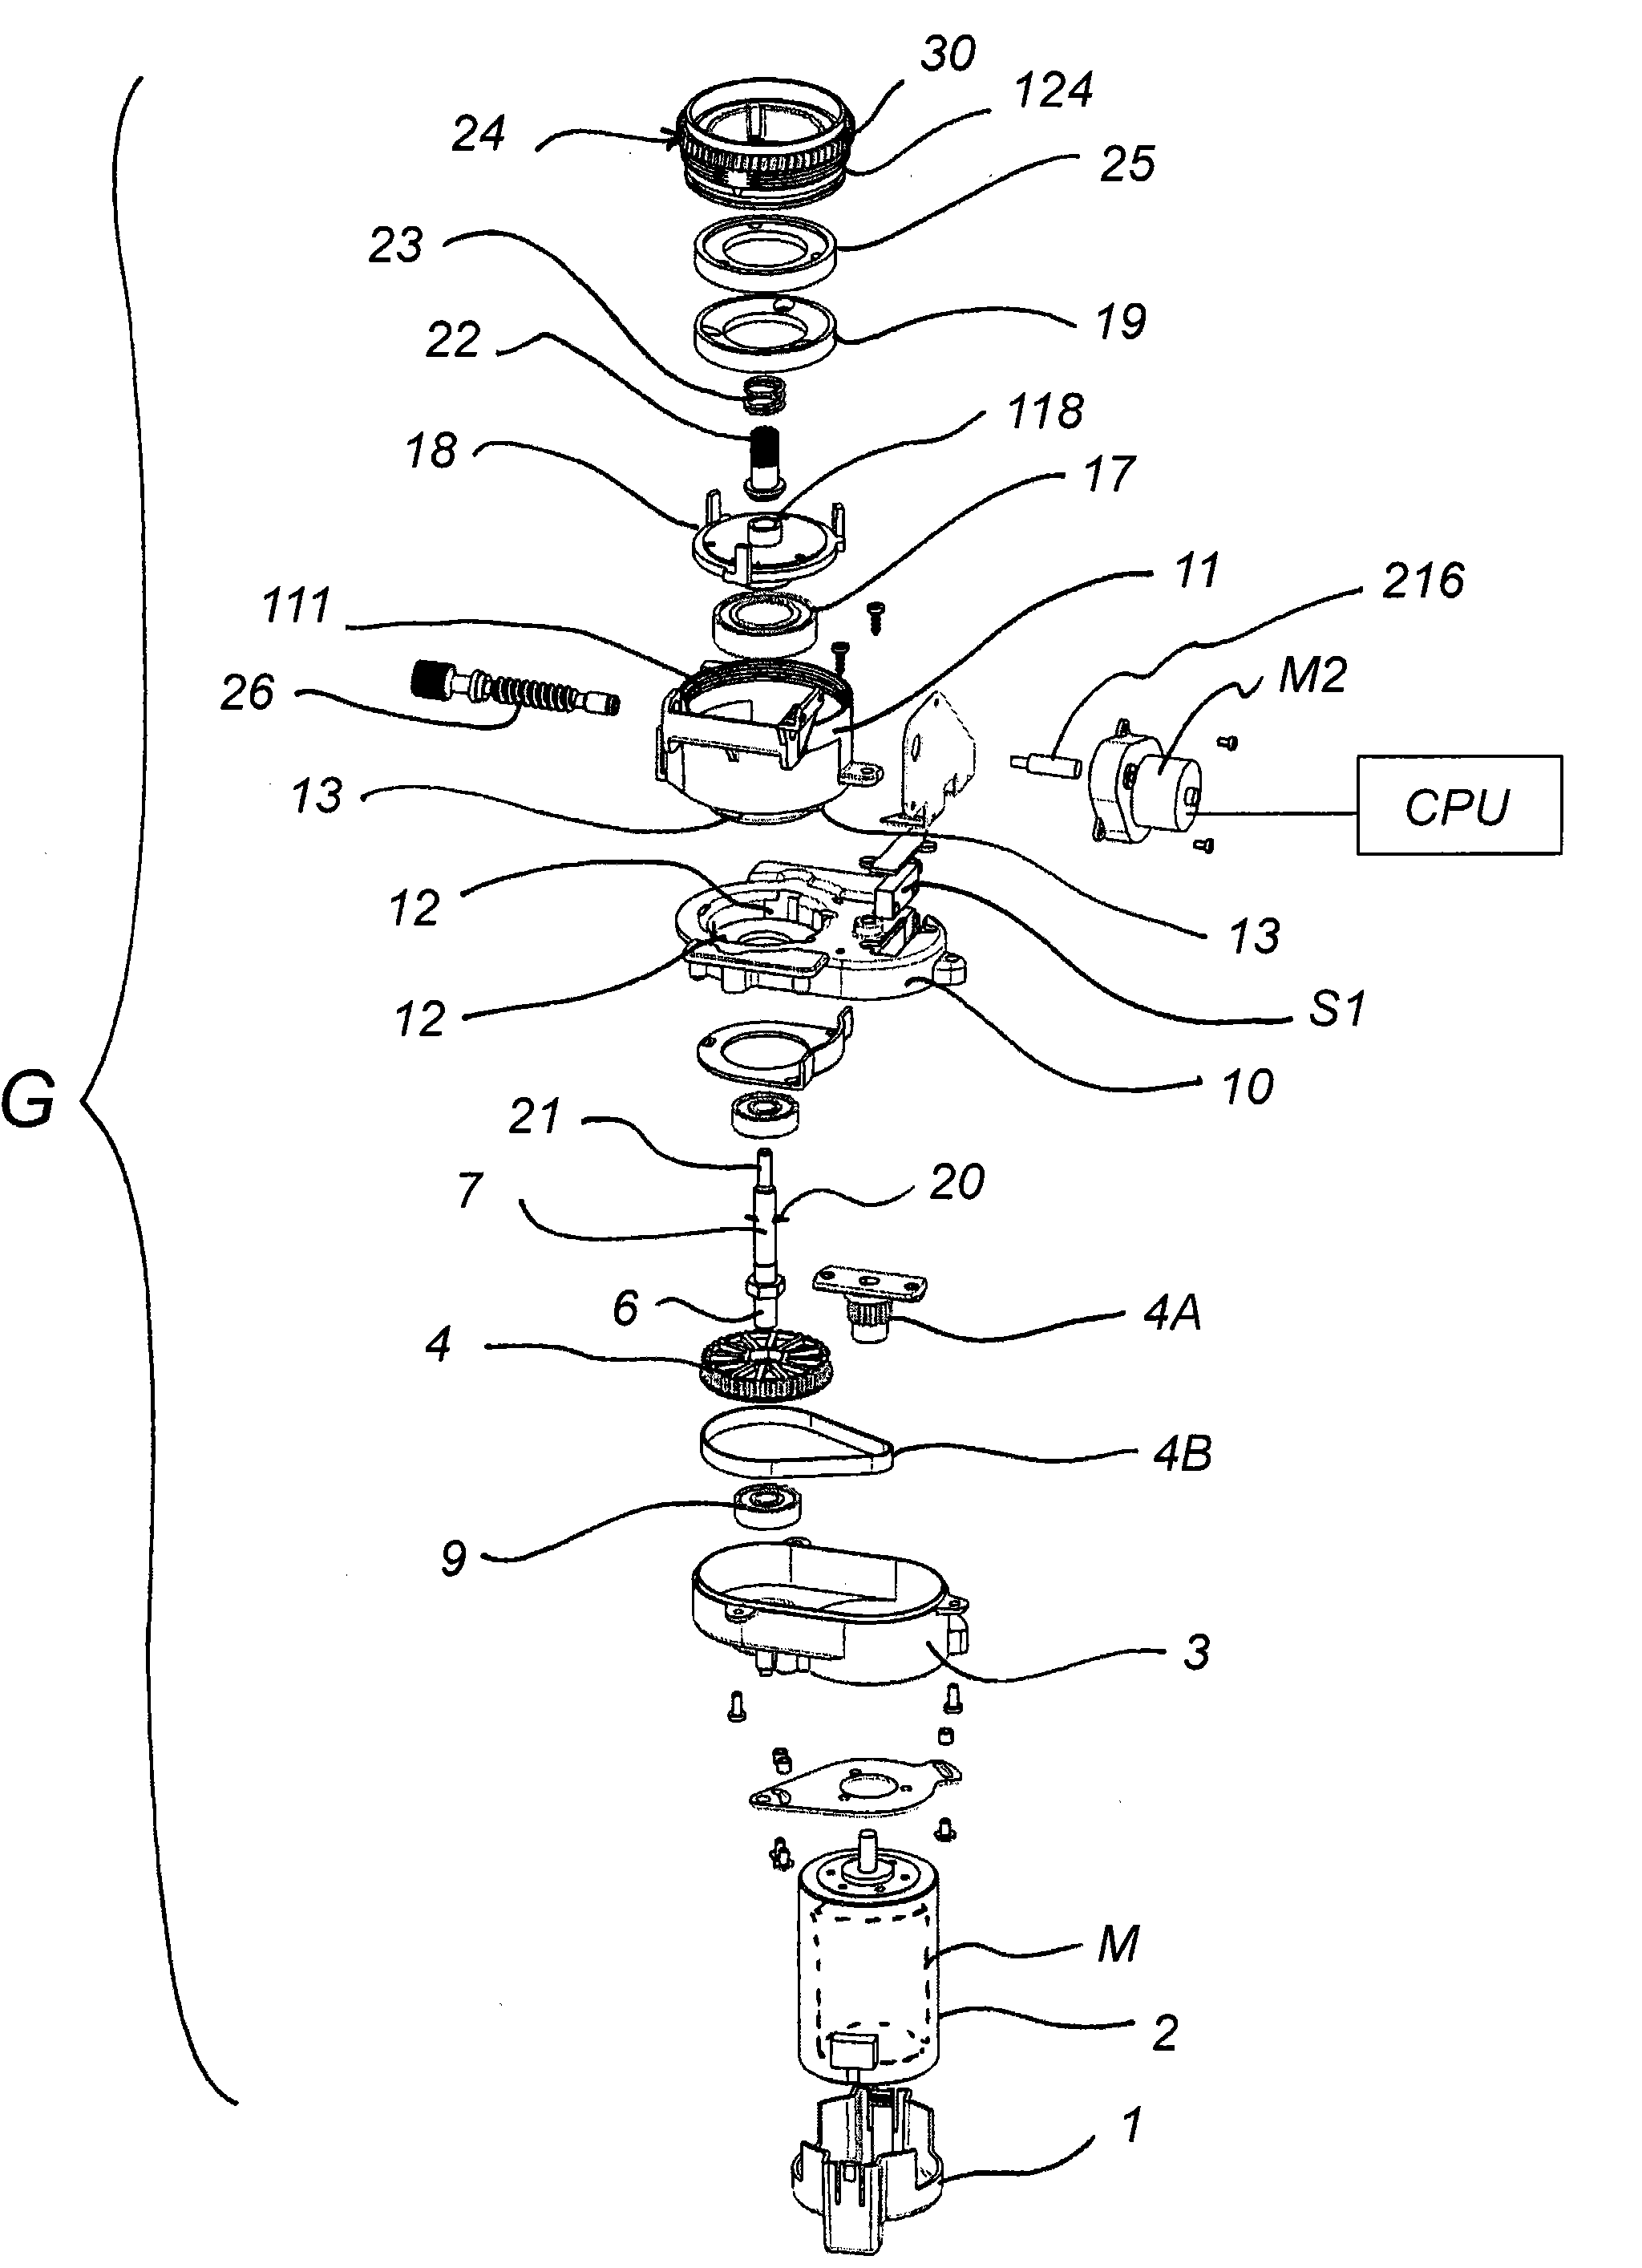 Device for grinding coffee or other alimentary substances